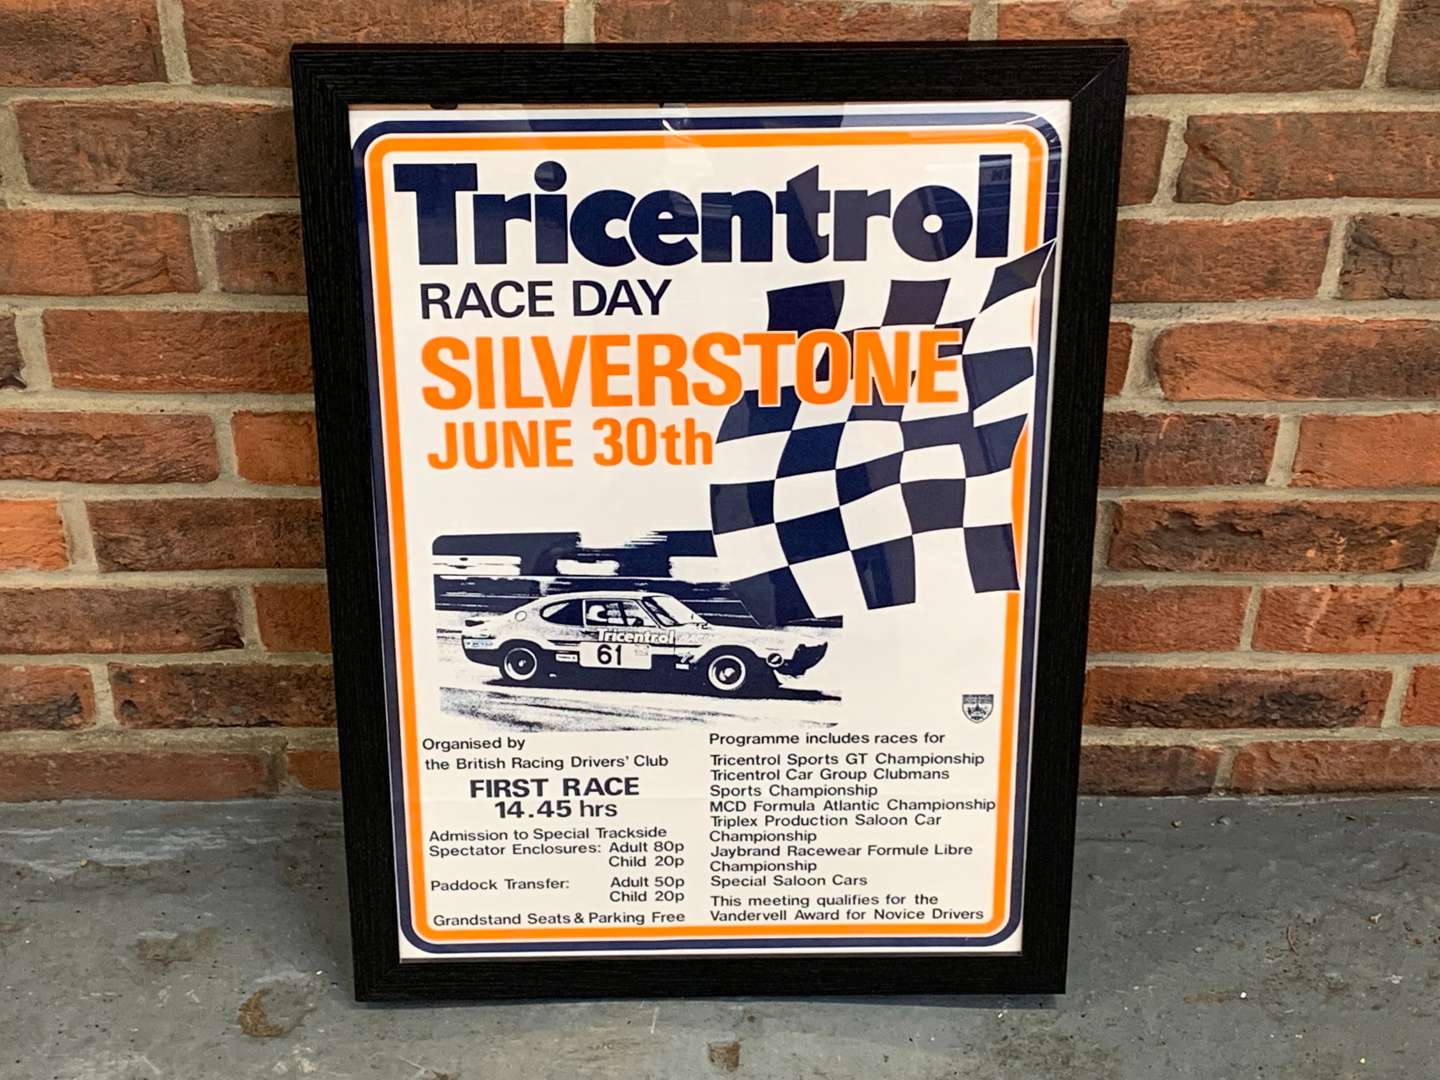 <p>Original Framed Silverstone Tricentrol Race Day Poster</p>